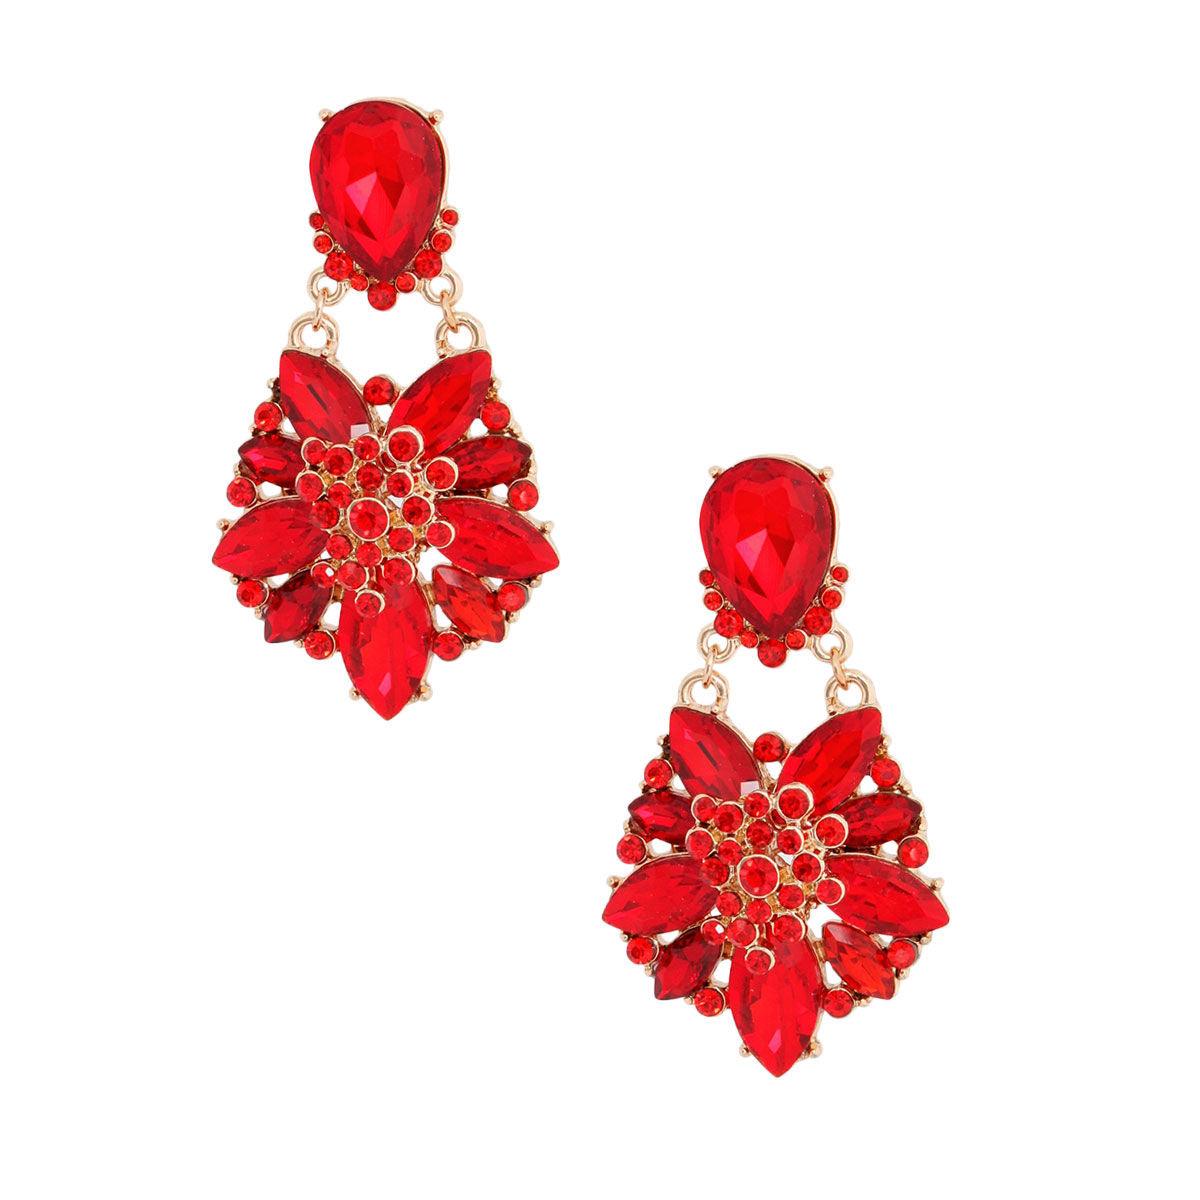 Stunning Red Drop Dangle Earrings: Add Sparkle Today!